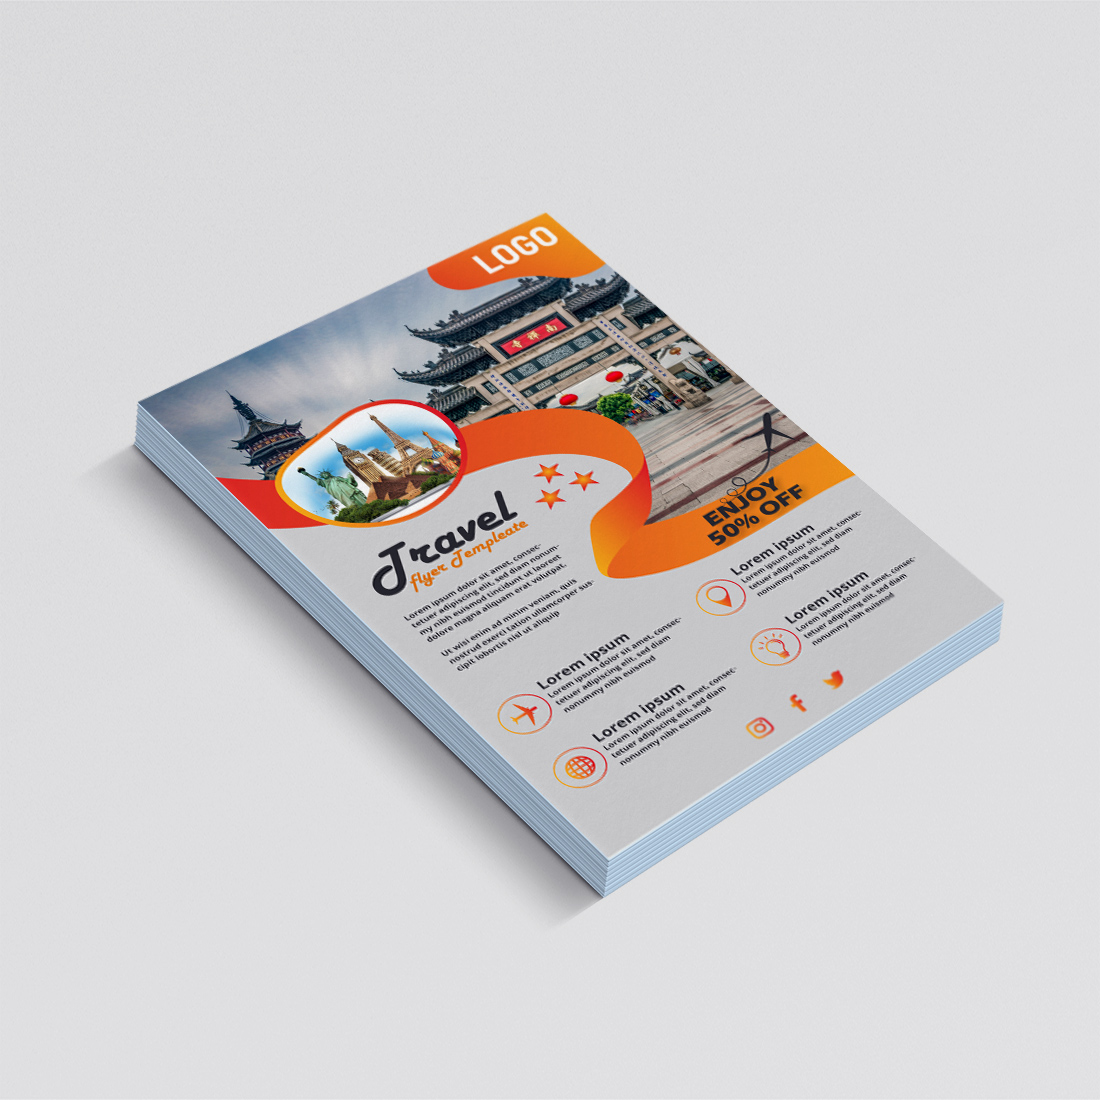 Travel brochure is shown on a white background.